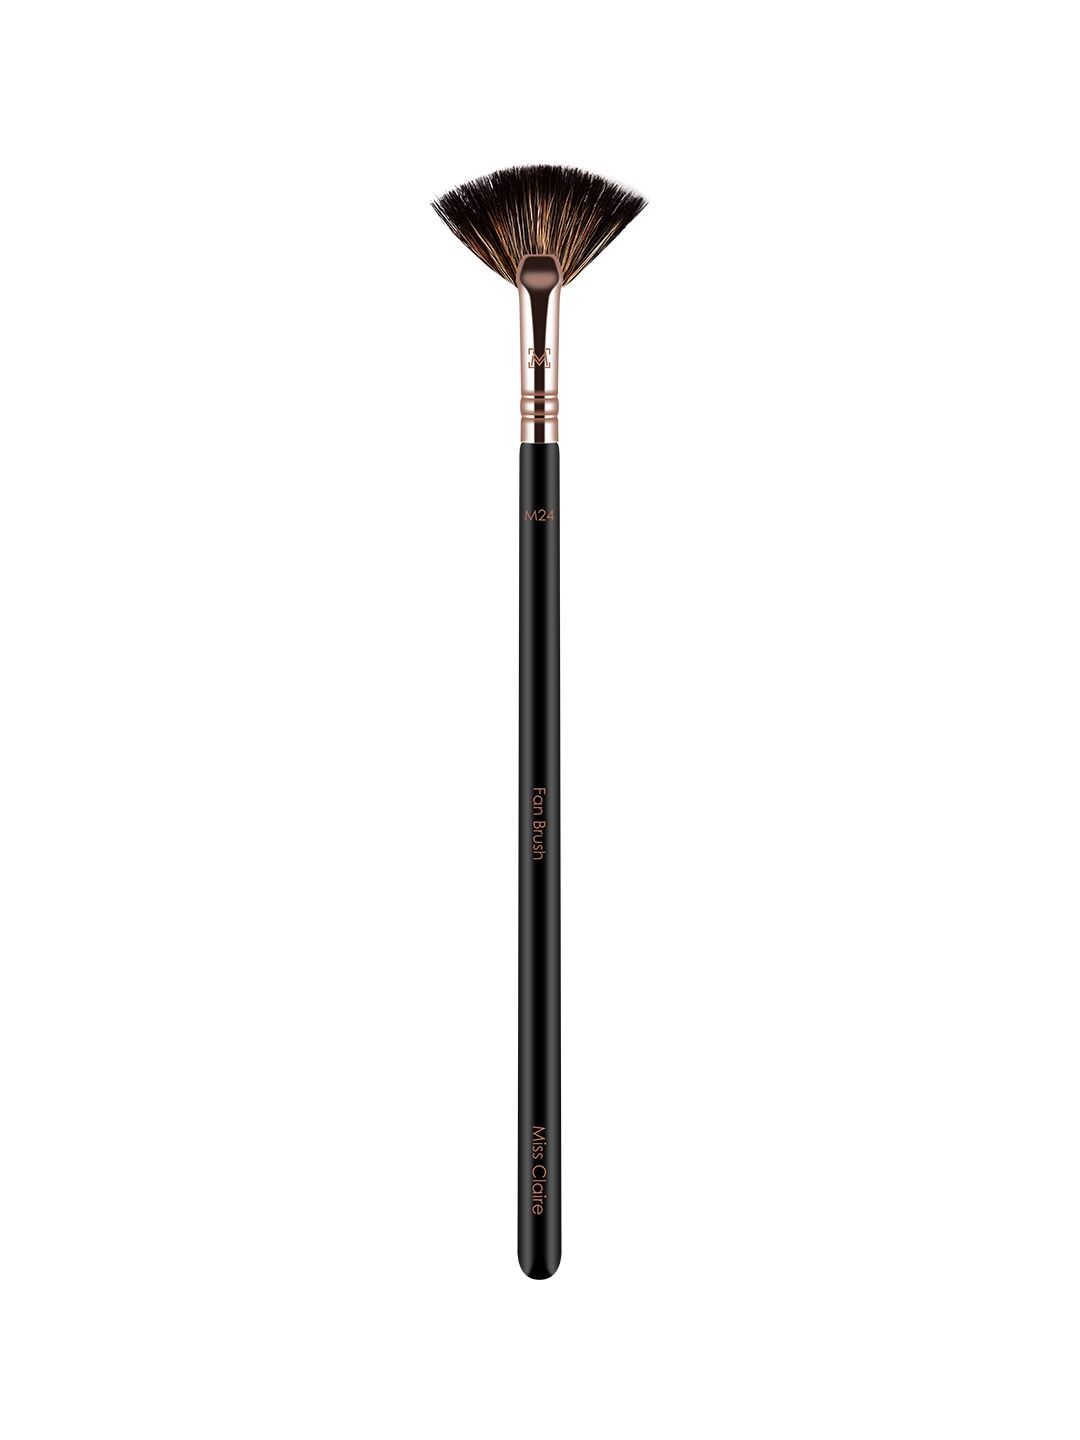 Miss Claire Fan Brush - M24 Black & Rose Gold-Toned Price in India